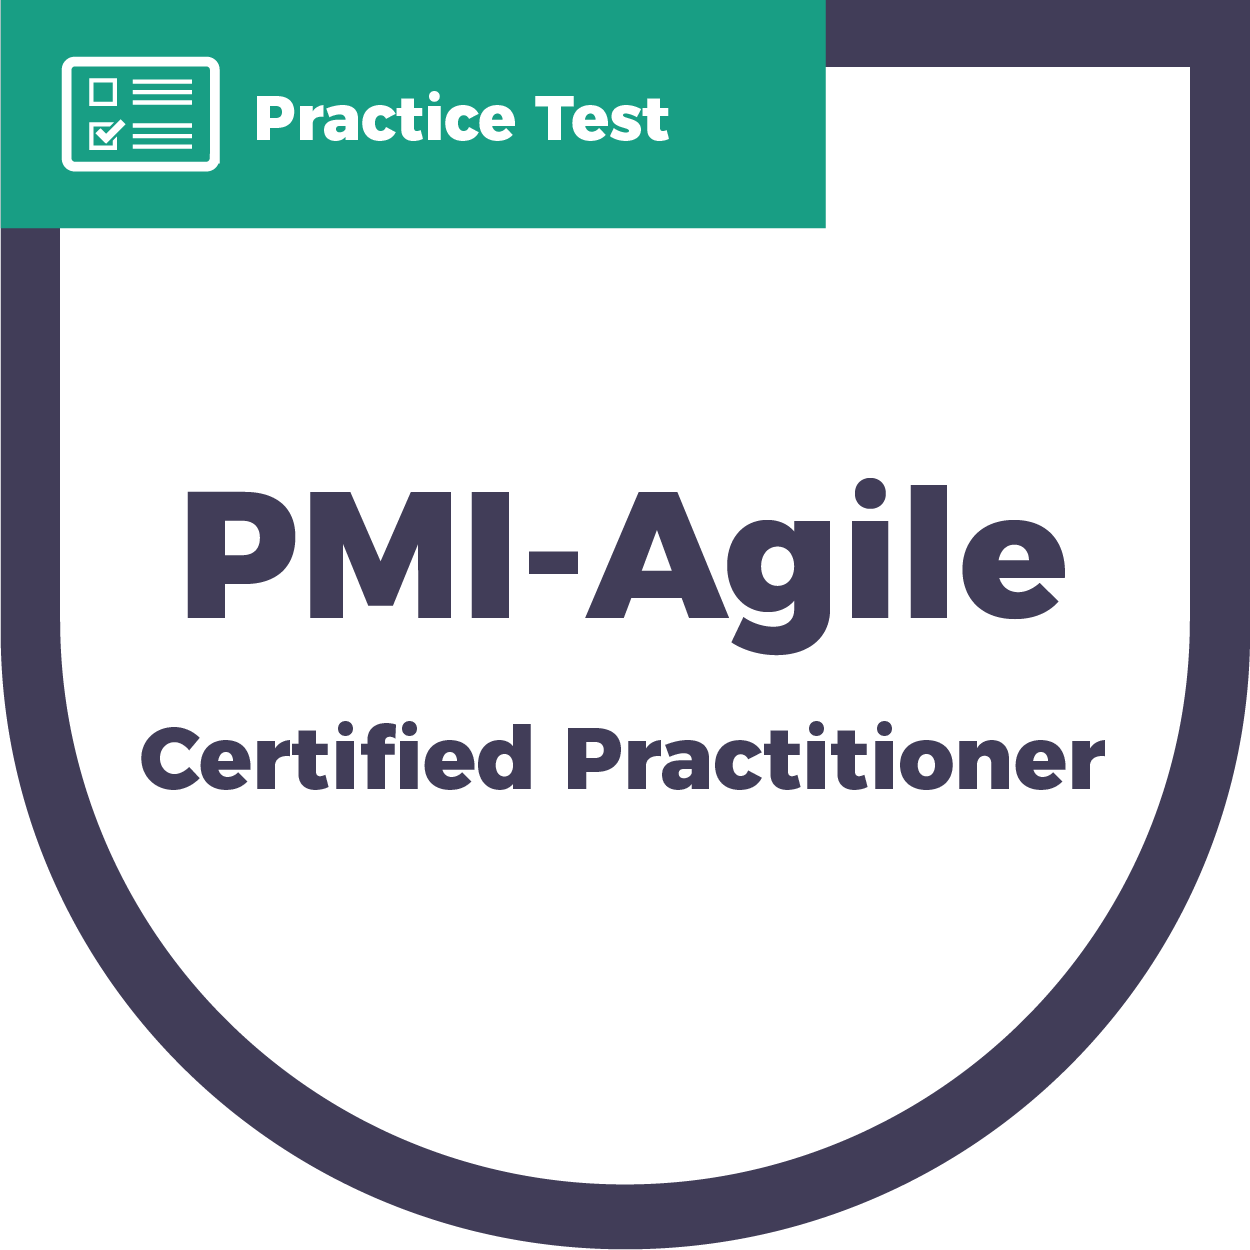 Project Management Institute Agile Certified Practitioner (PMI-ACP) | CyberVista Practice Test